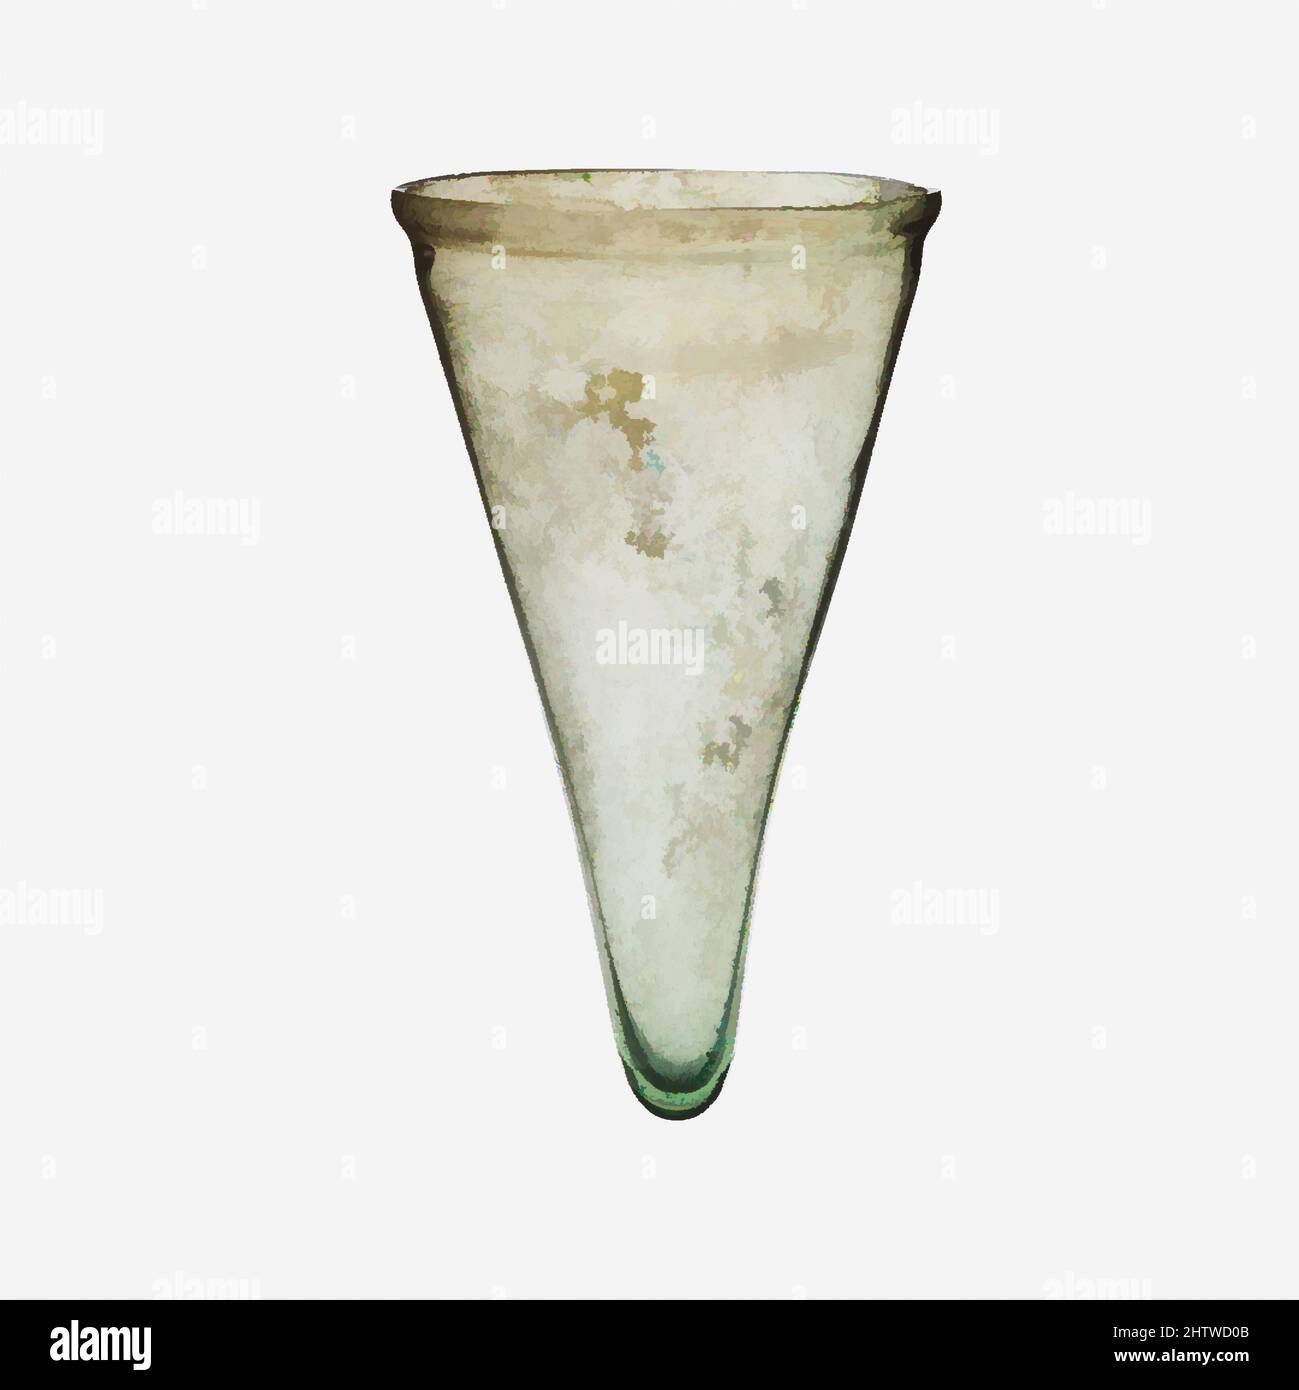 Art inspired by Glass lamp, Late Imperial, 4th century A.D., Roman, Glass; blown, Height: 5 3/4 in. (14.6 cm), Glass, Translucent pale green with bluish tinge Unworked, uneven, knocked off rim; narrow bulging collar below; almost straight sides tapering to pointed, thick bottom, with, Classic works modernized by Artotop with a splash of modernity. Shapes, color and value, eye-catching visual impact on art. Emotions through freedom of artworks in a contemporary way. A timeless message pursuing a wildly creative new direction. Artists turning to the digital medium and creating the Artotop NFT Stock Photo